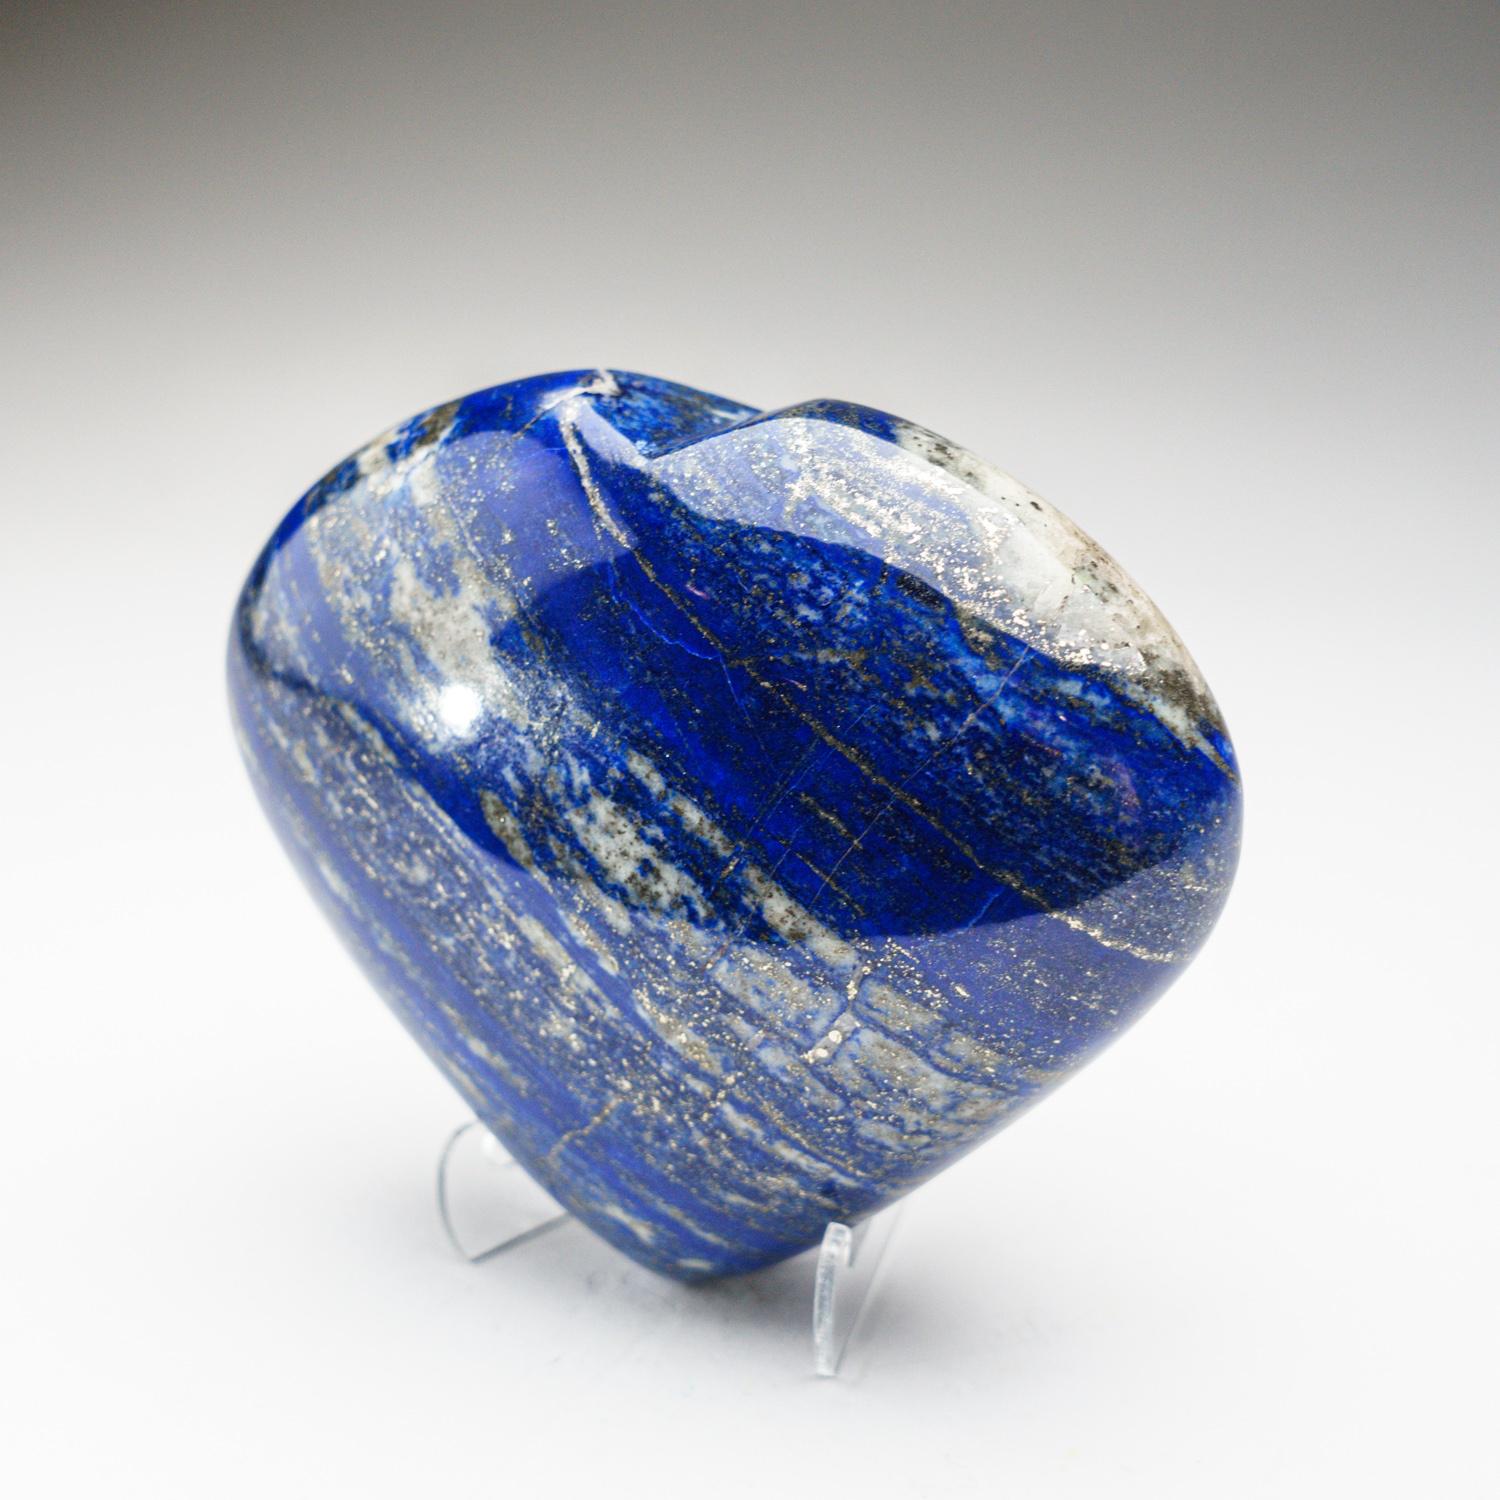 Beautiful, AAA quality hand-polished natural Lapis Lazuli heart from Afghanistan. This specimen has rich, electric-royal blue color enriched with scintillating pyrite microcrystals.

Lapis Lazuli is a powerful crystal for activating the higher